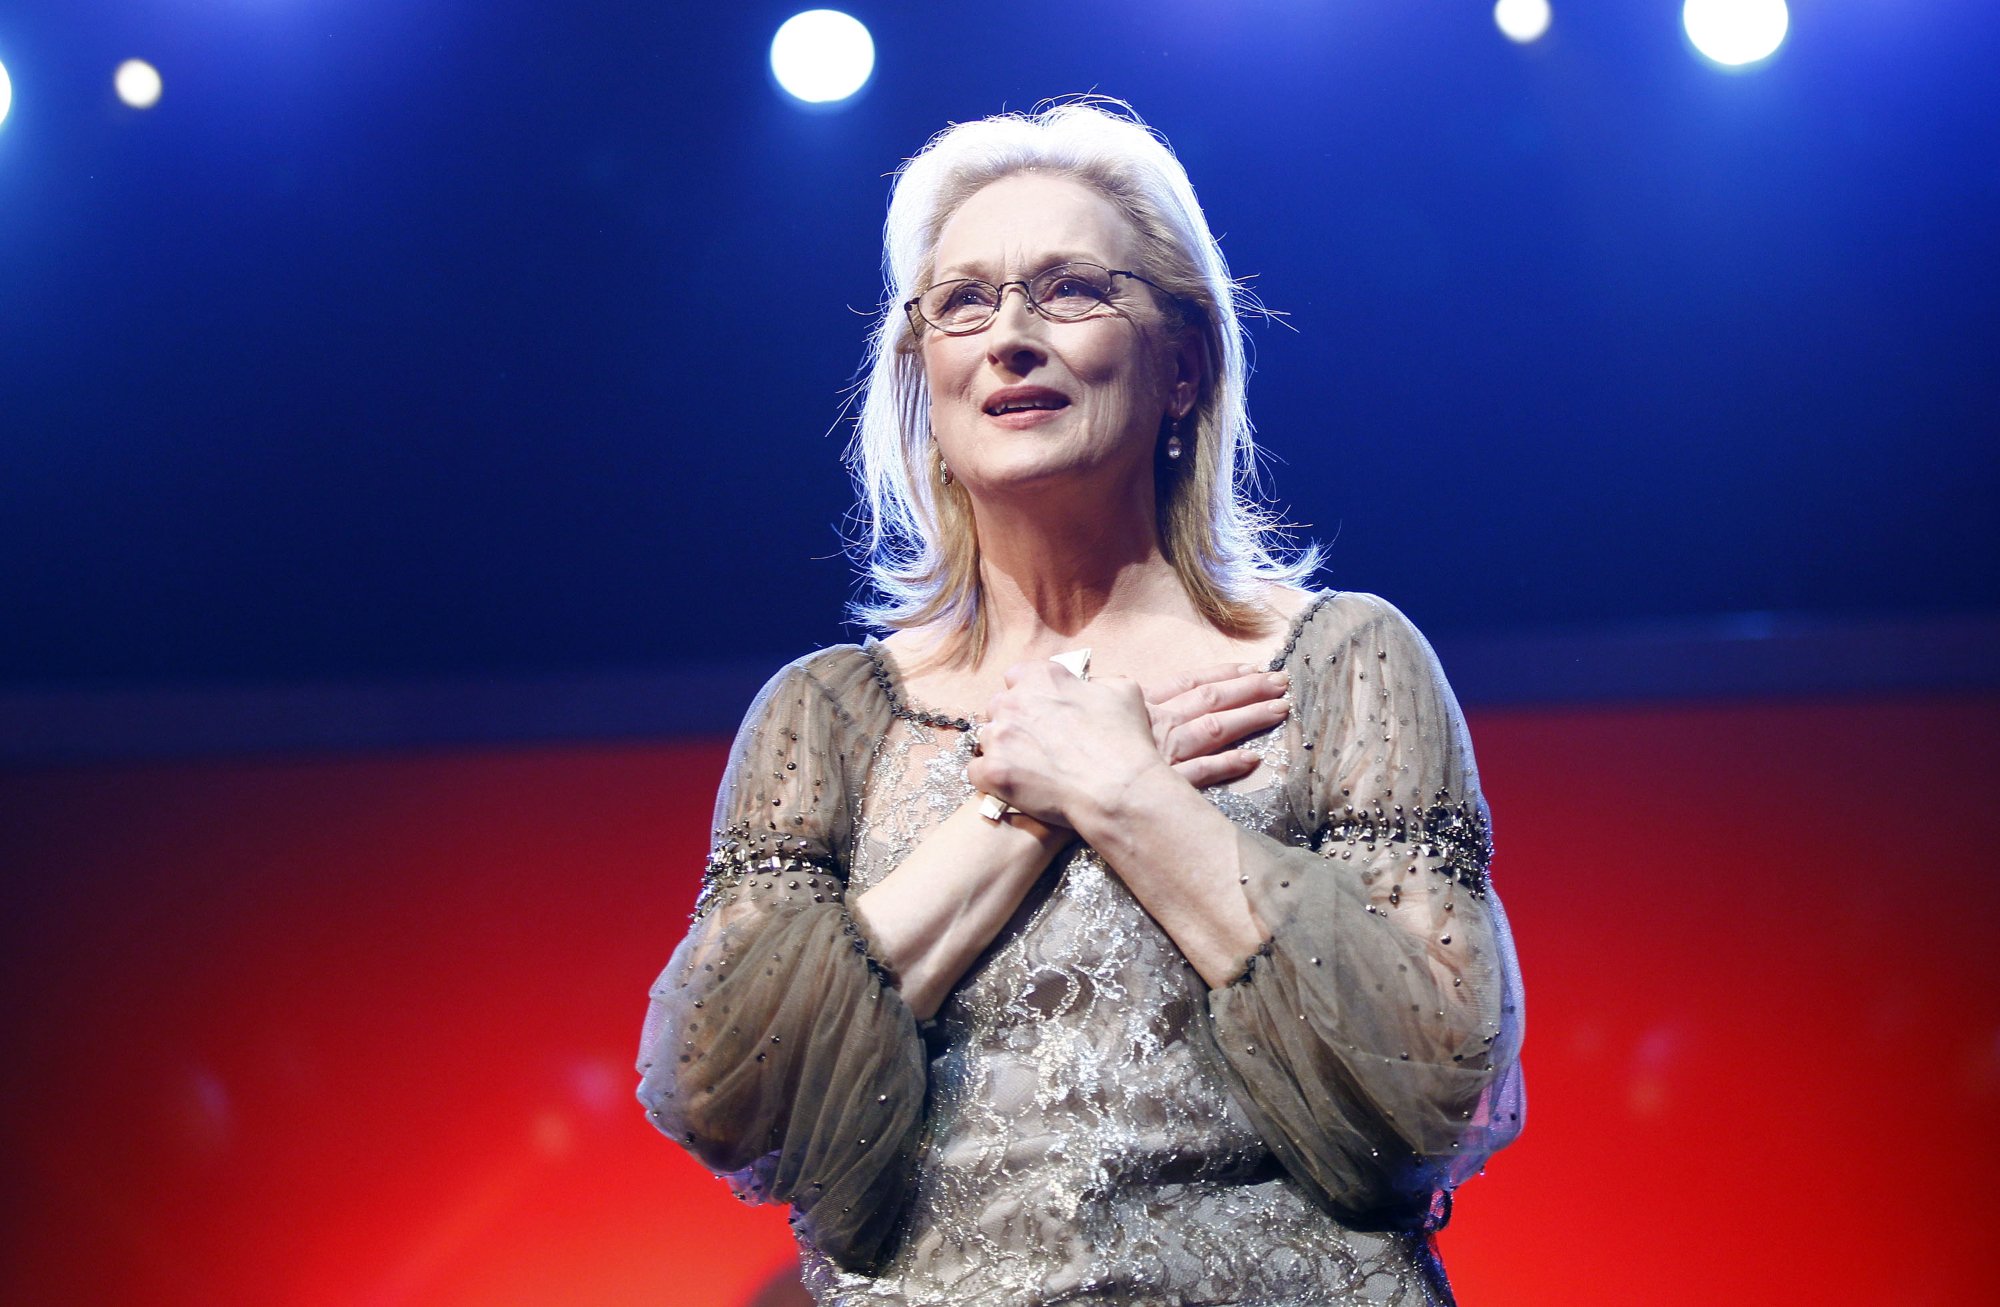 Meryl Streep being honored for her movies holding her hands over her chest wearing a silver and beaded gown